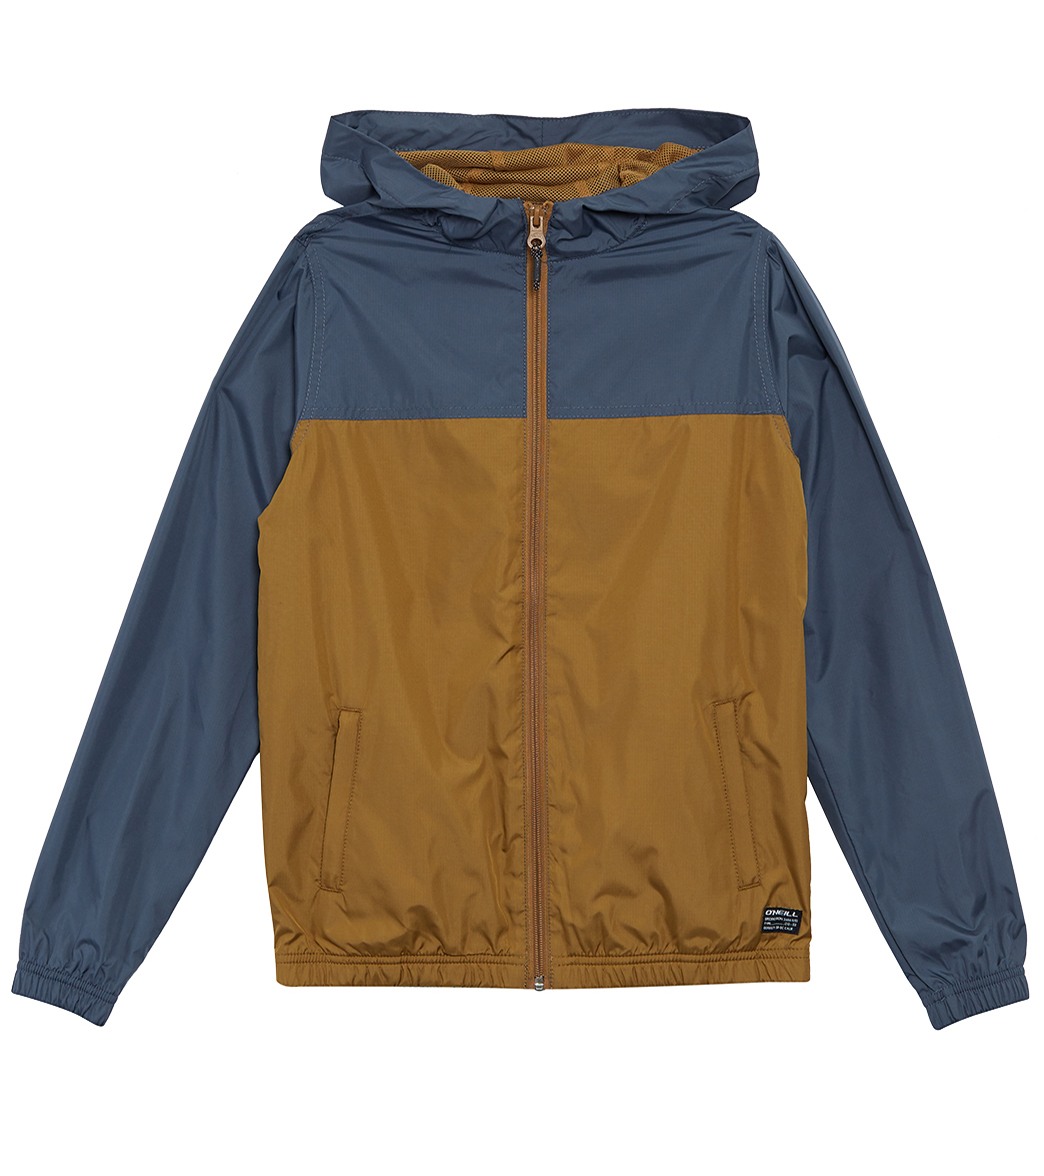 O'neill Boys' Del Ray Packable Windbreaker Jacket Big Kid - Slate Large 14/16 Cotton/Polyester - Swimoutlet.com